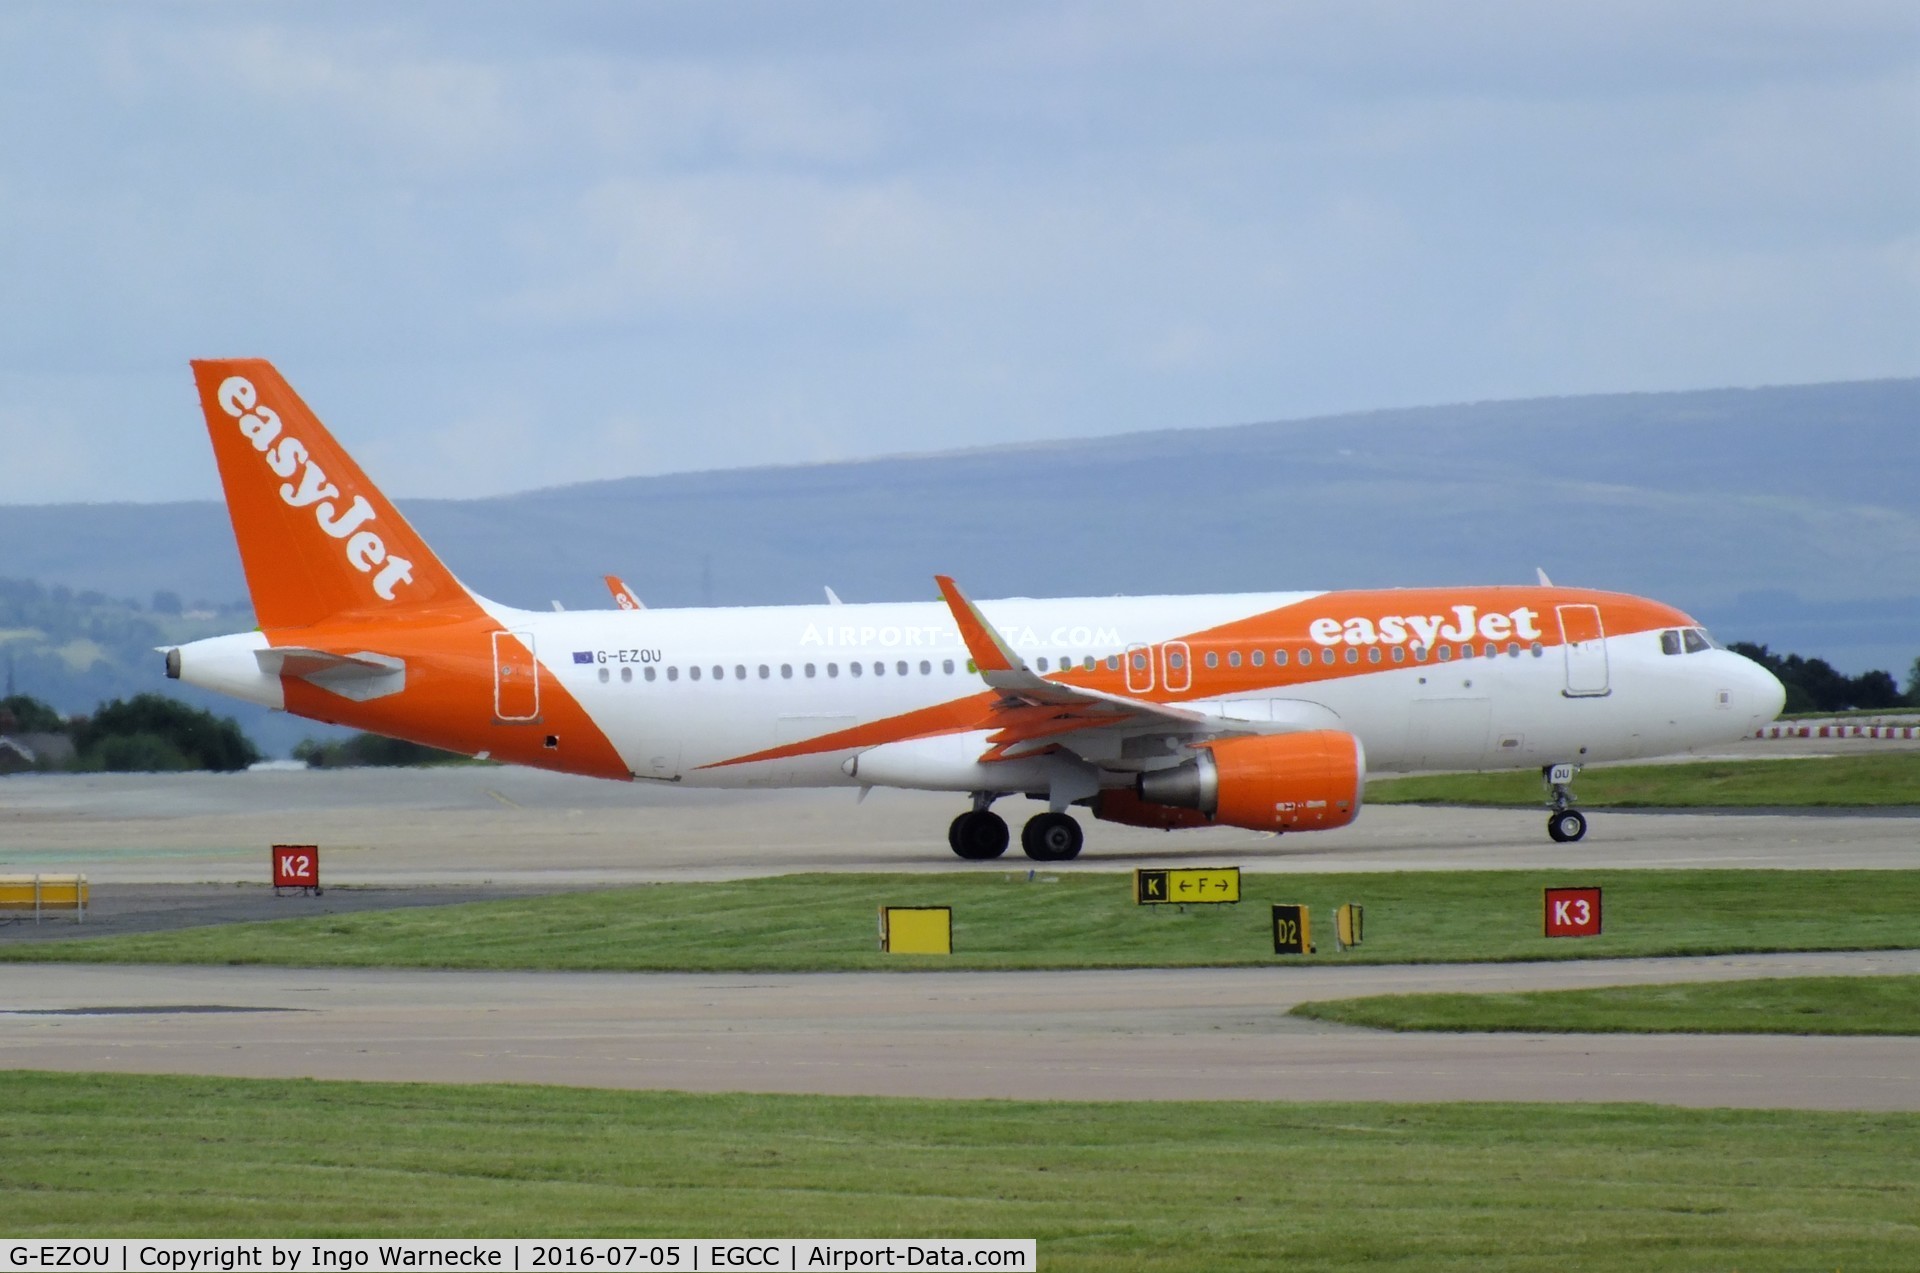 G-EZOU, 2015 Airbus A320-214 C/N 6754, Airbus A320-214 of easyJet at Manchester airport